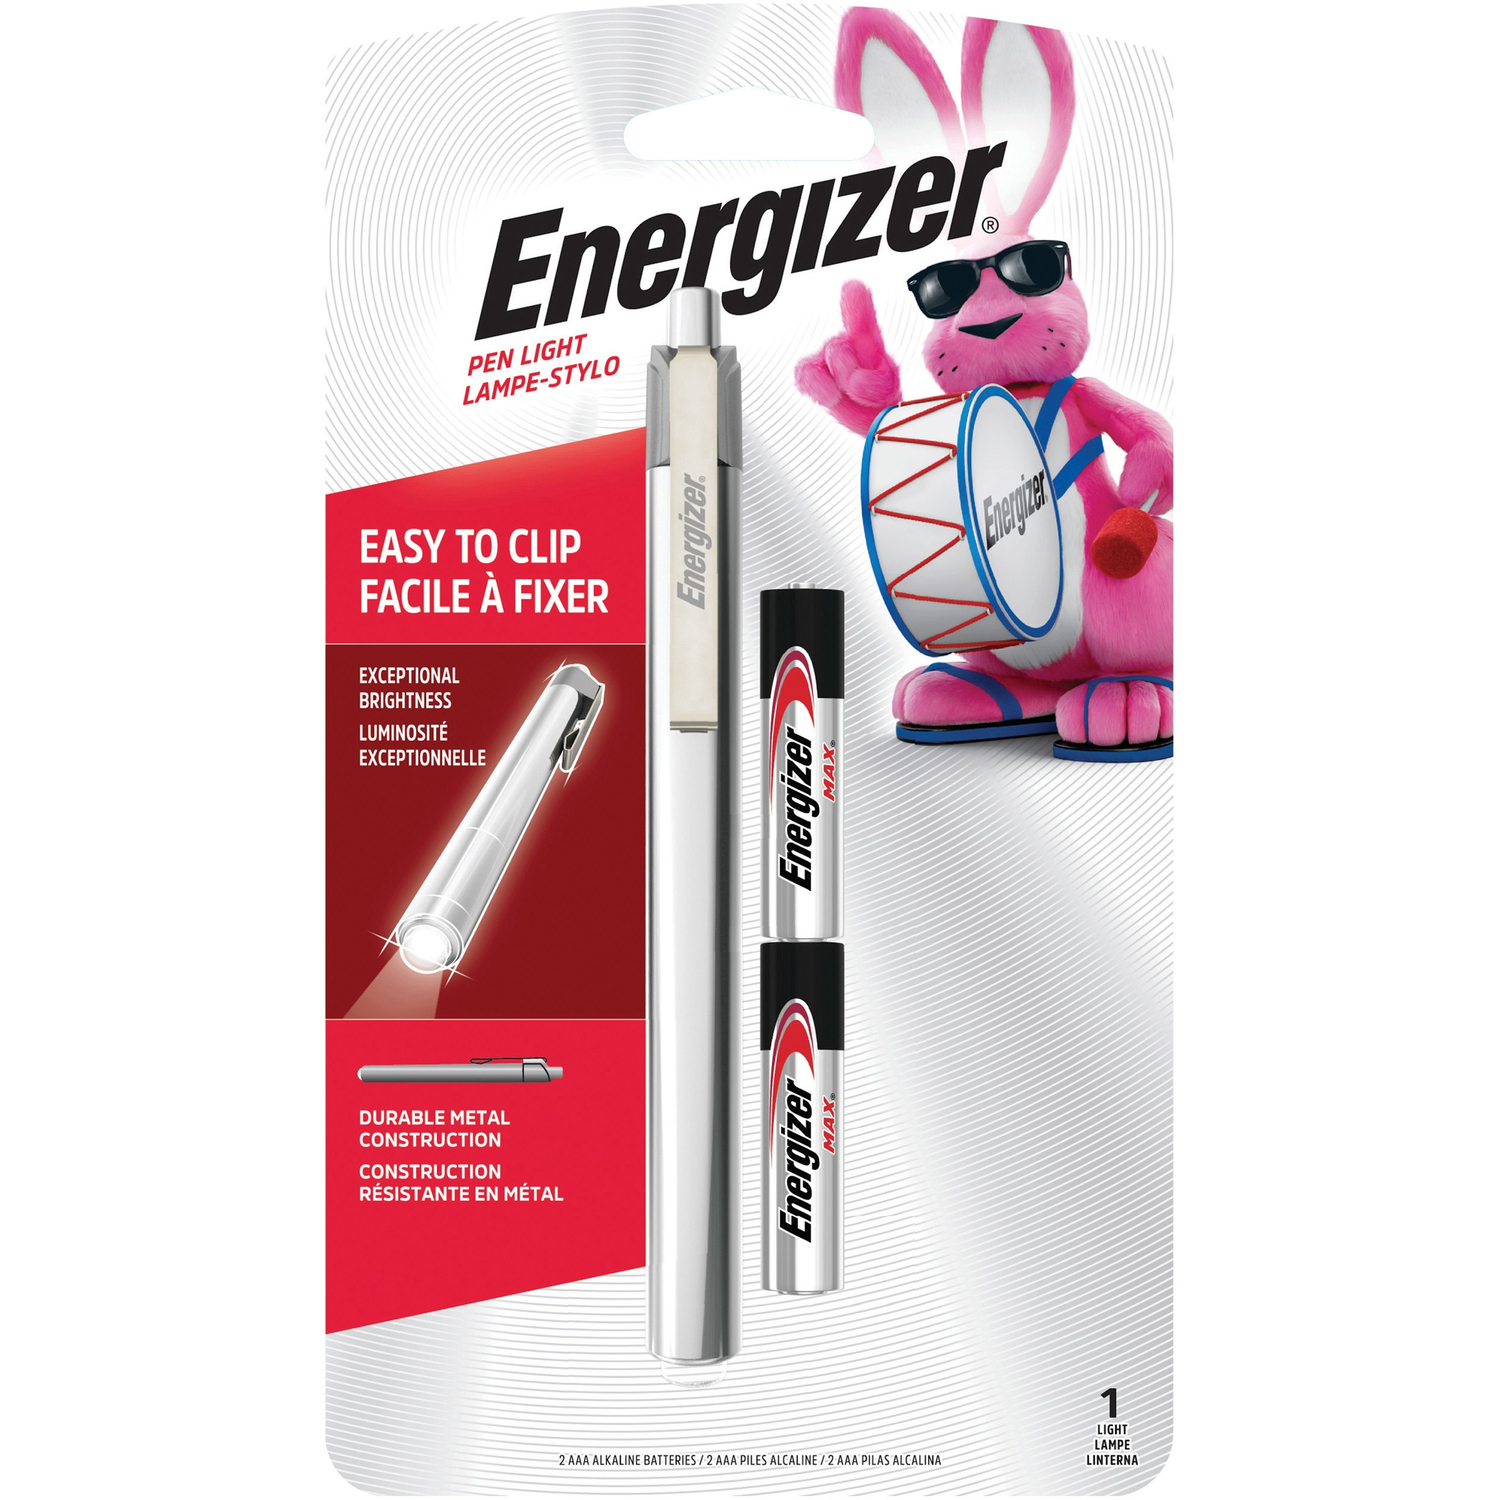 Photos - Torch Energizer 35 lm Gray LED Pen Light AAA Battery PLED23AEH 